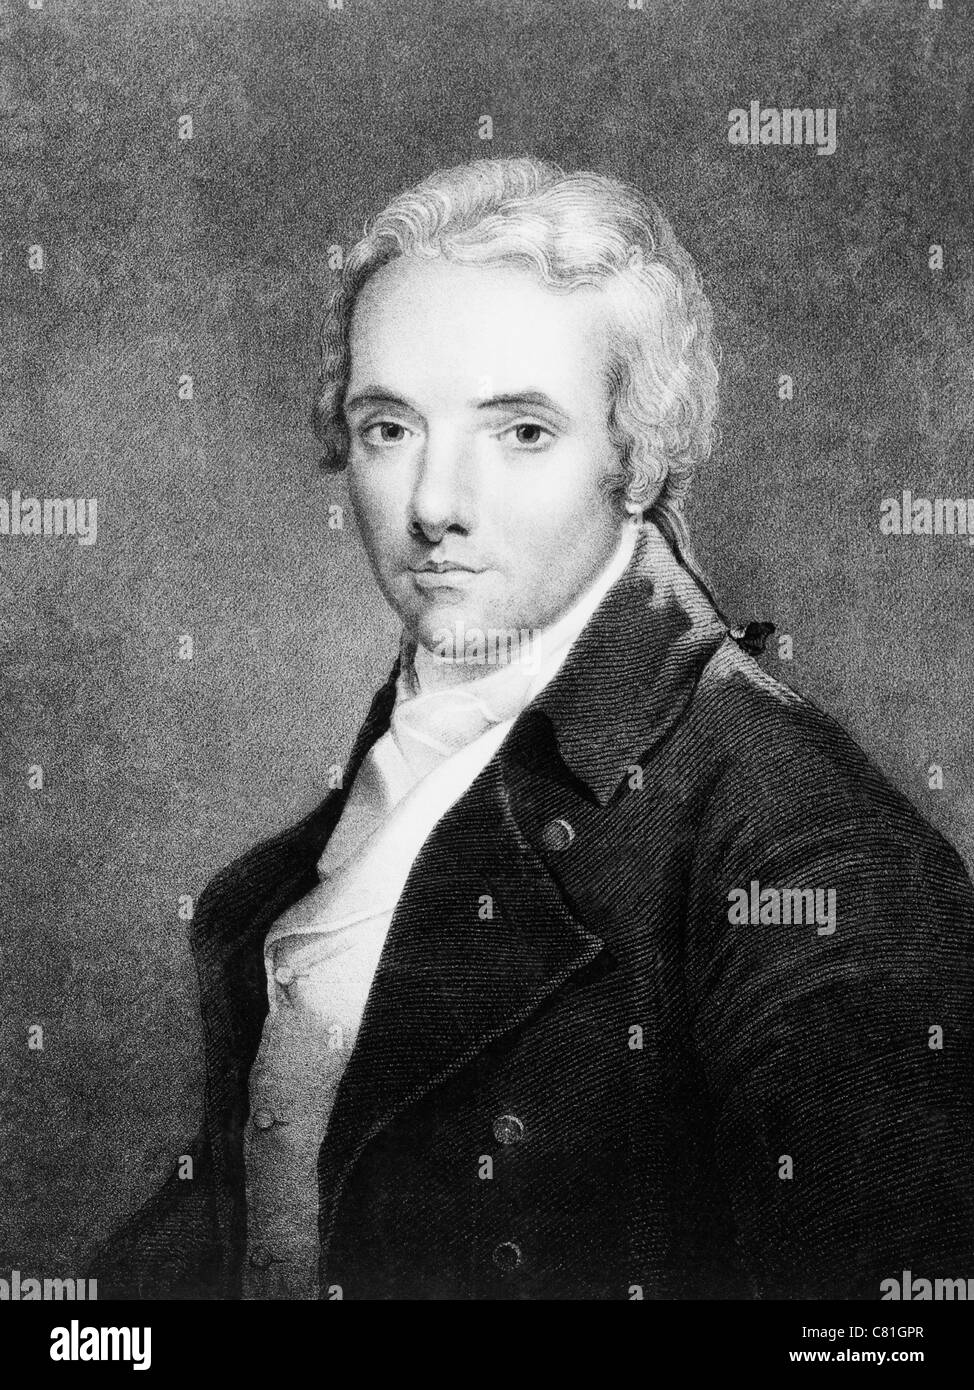 Vintage portrait circa 1884 of British politician and abolitionist William Wilberforce (1759 - 1833). Stock Photo